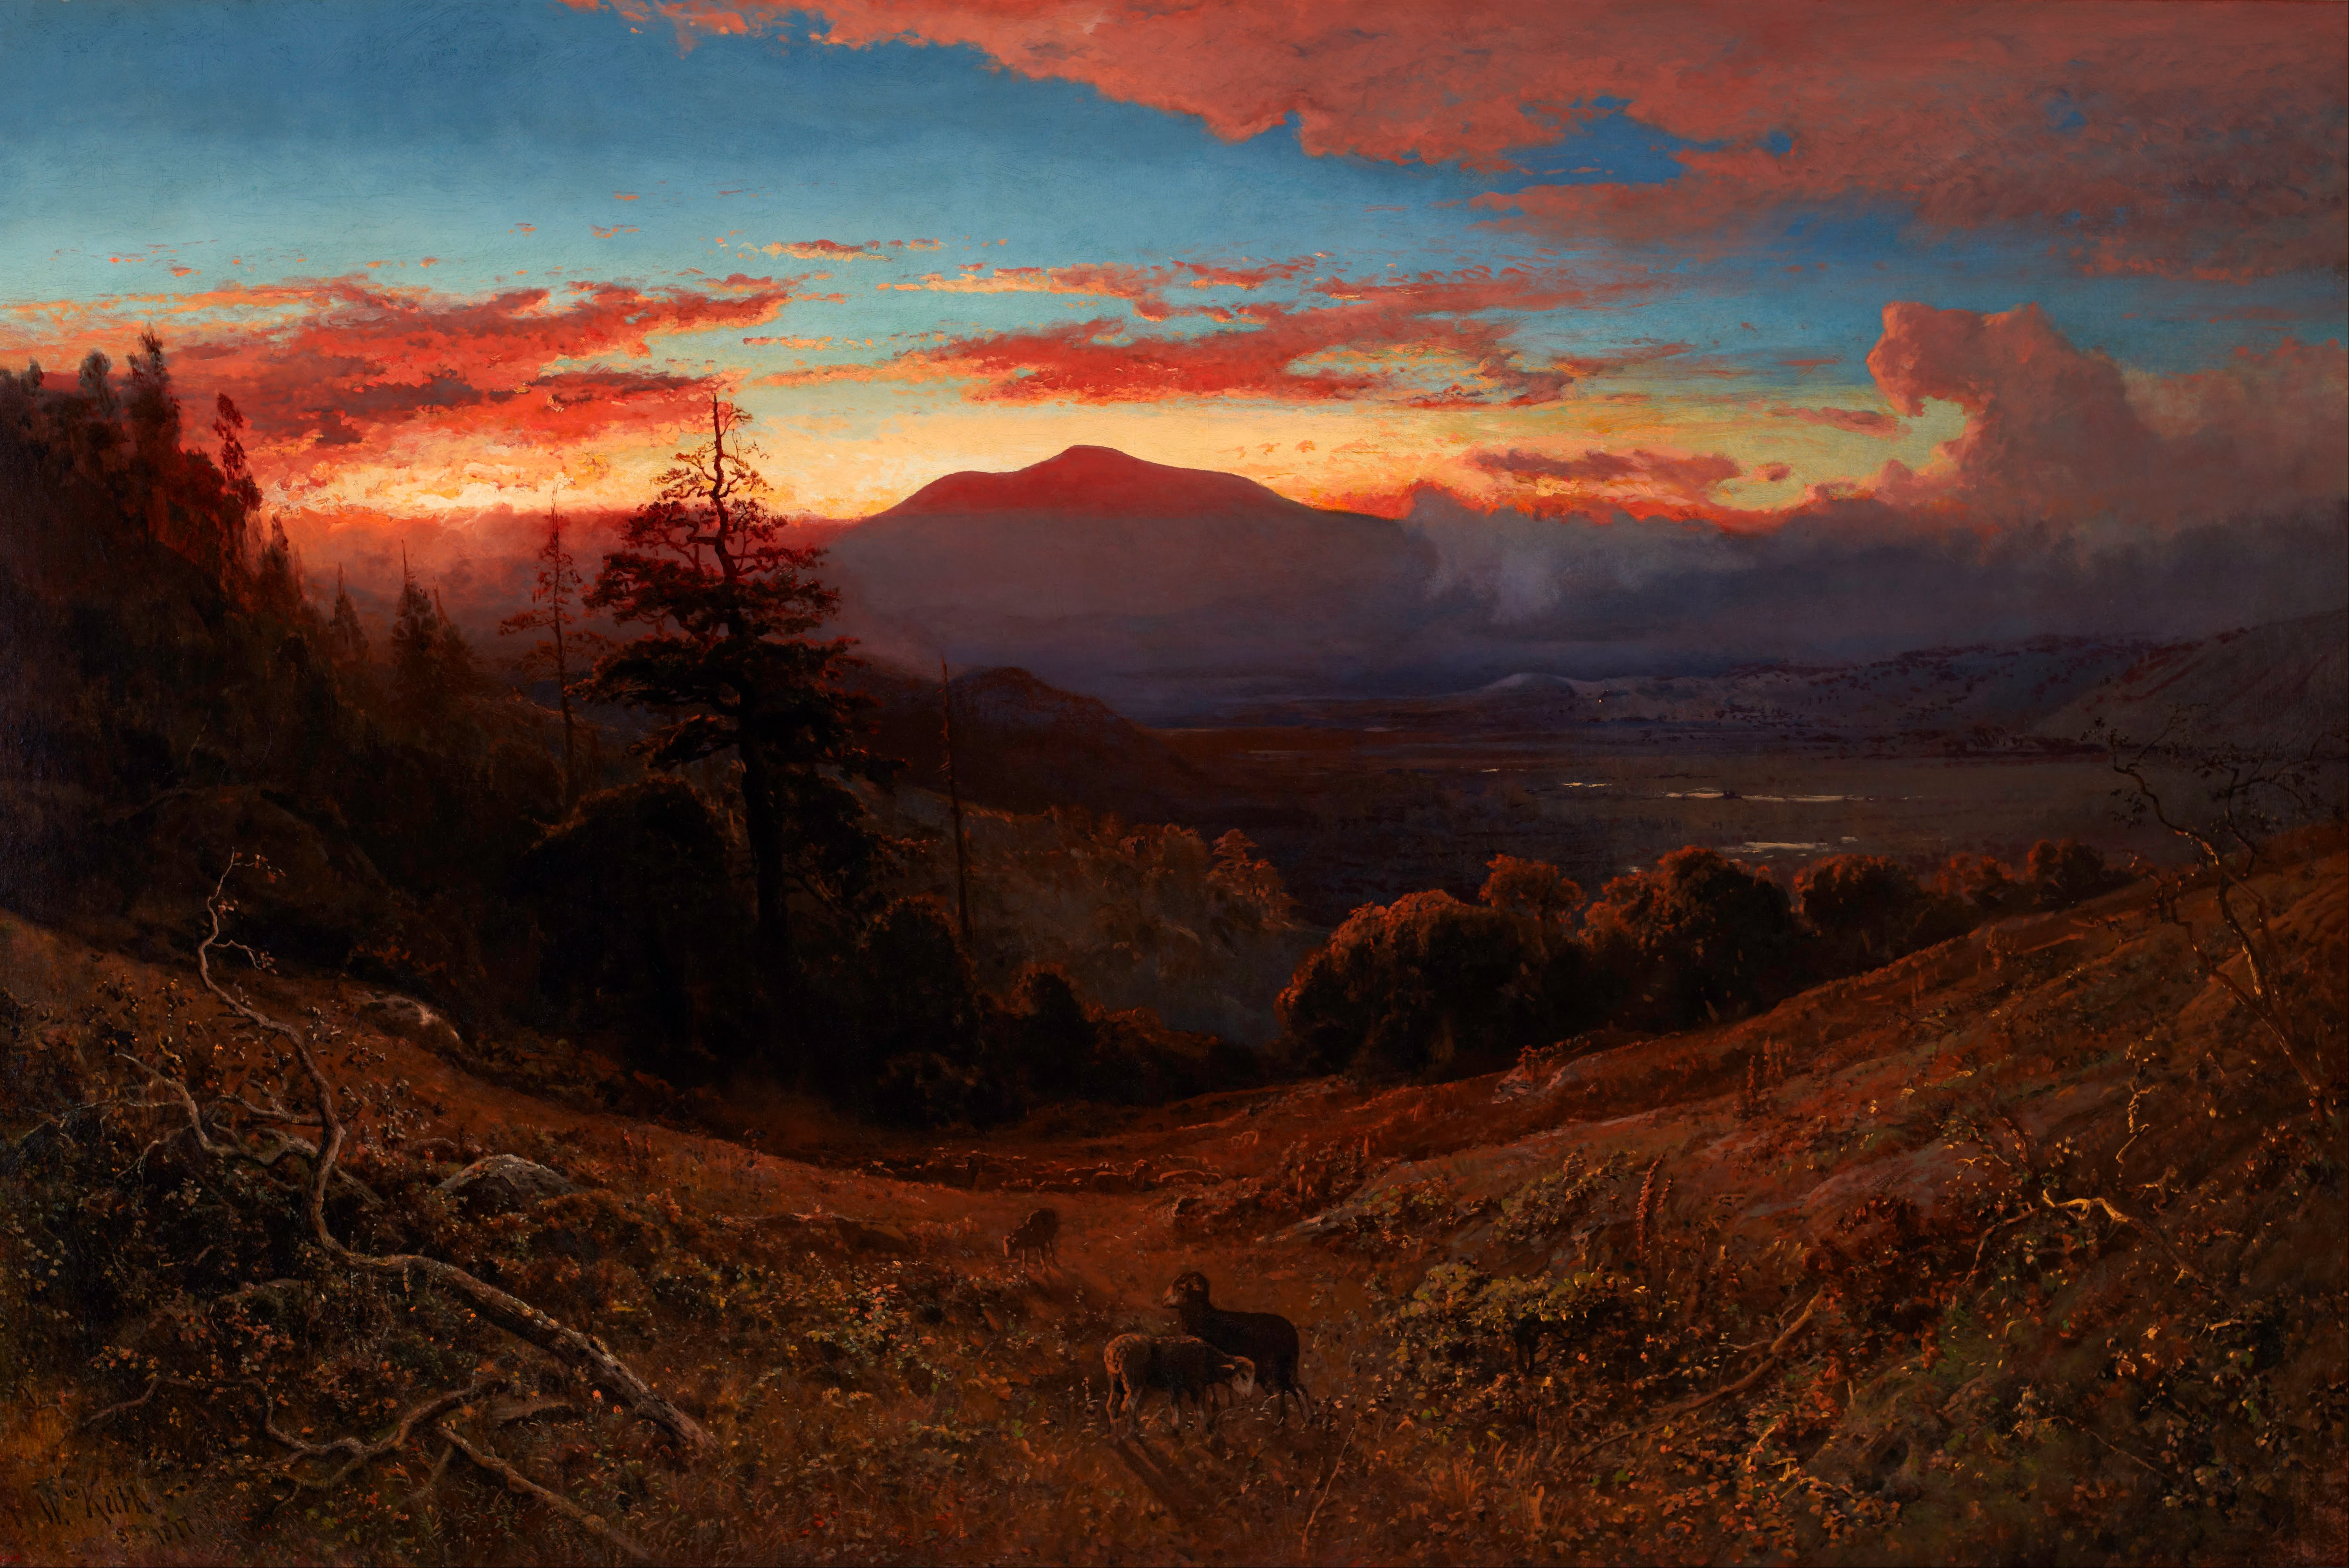 Sonnenuntergang am Mount Diablo by William Keith - 1877 - 150 x 99 cm Cantor Arts Center at Stanford University